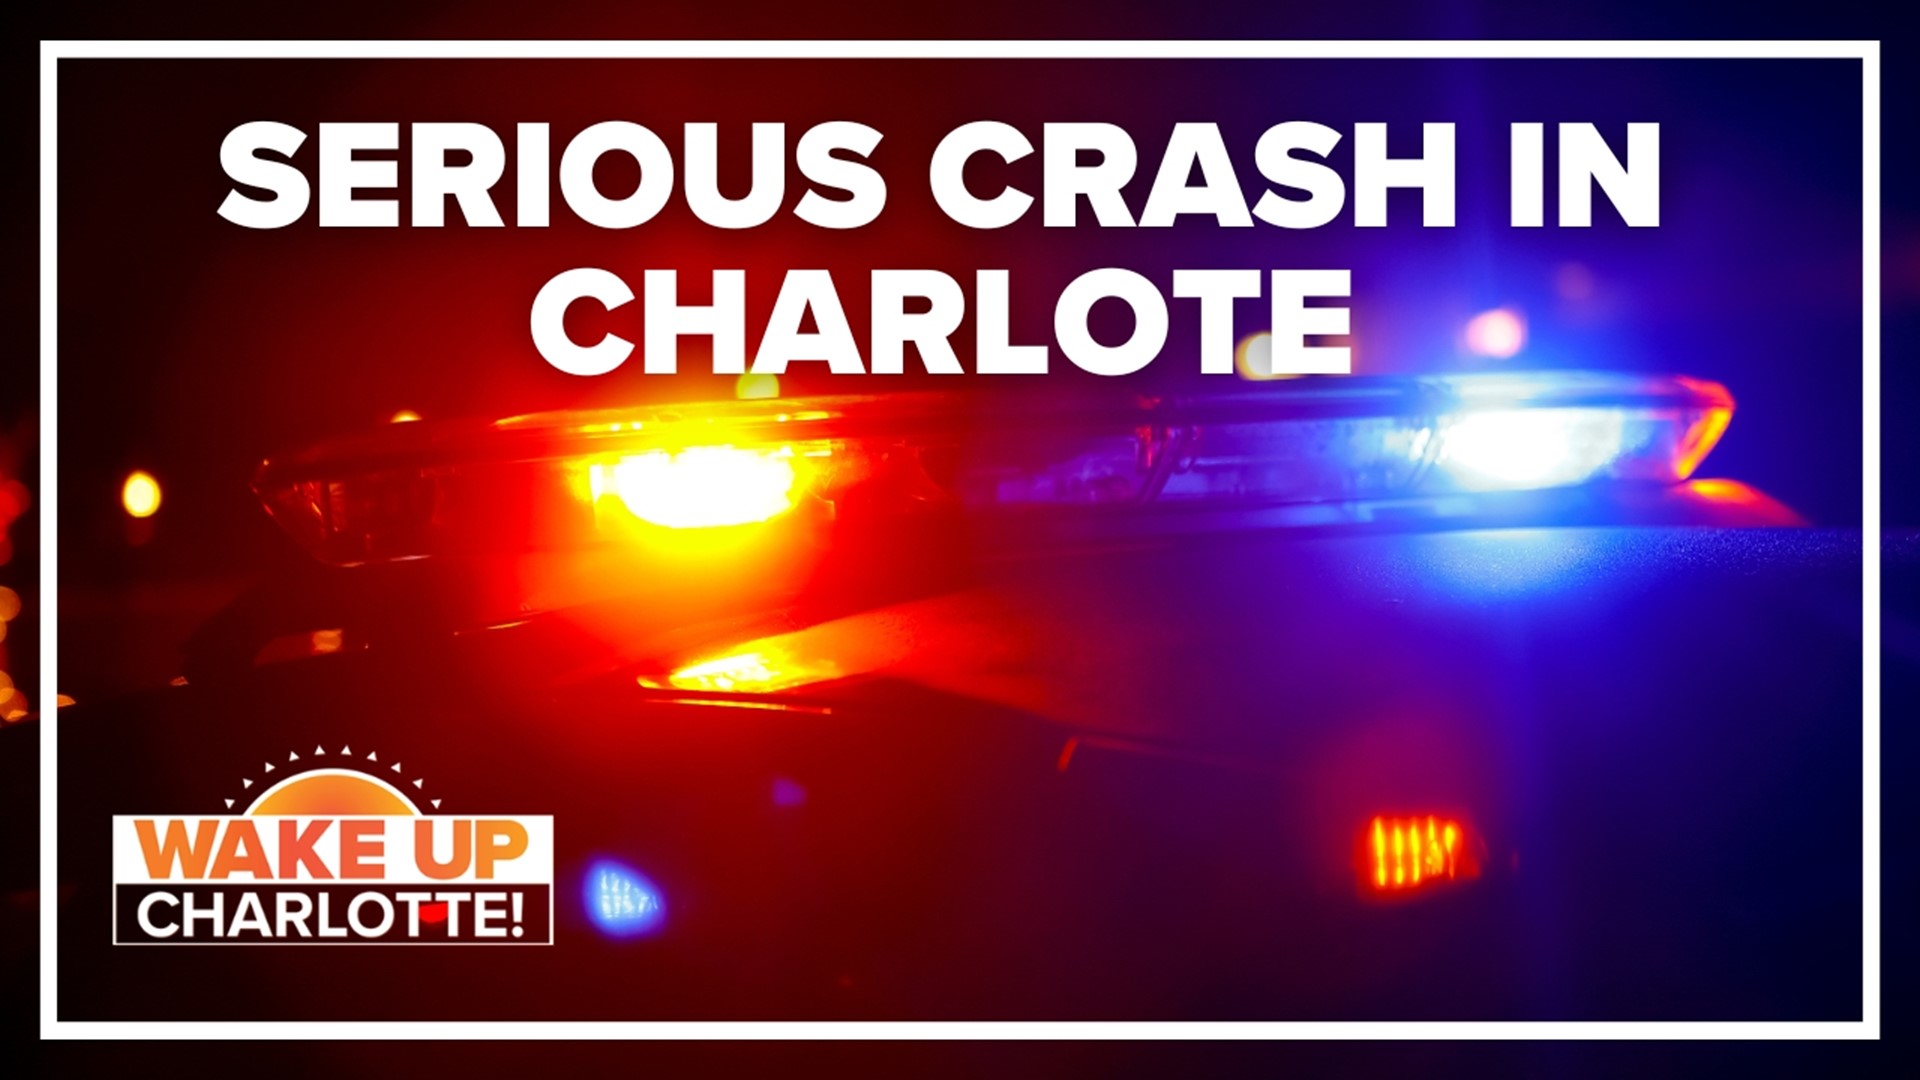 According to officials, the crash is blocking the ramp on I-77 NB at I-85 Exit 13. Drivers are asked to avoid the area as officials investigate this crash.